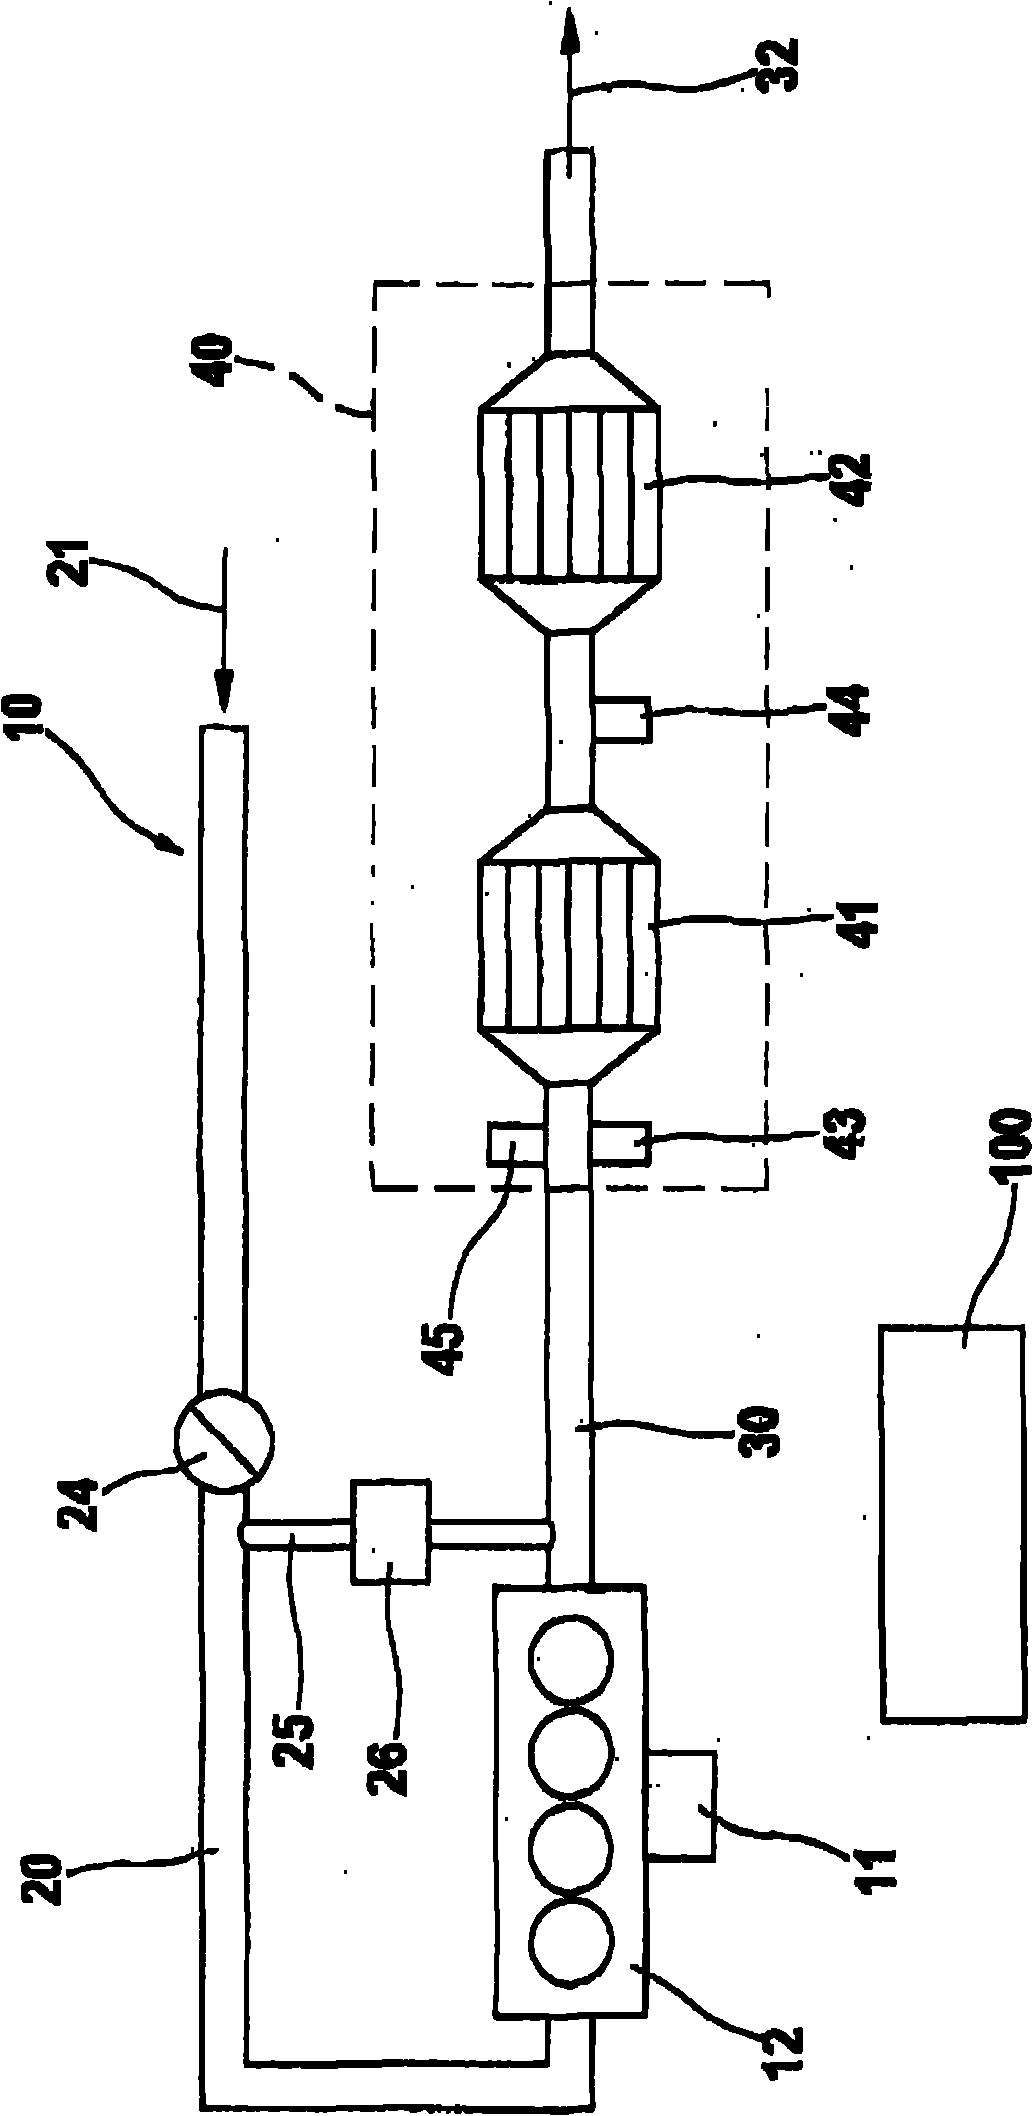 Detection of leakage in an air system of a motor vehicle